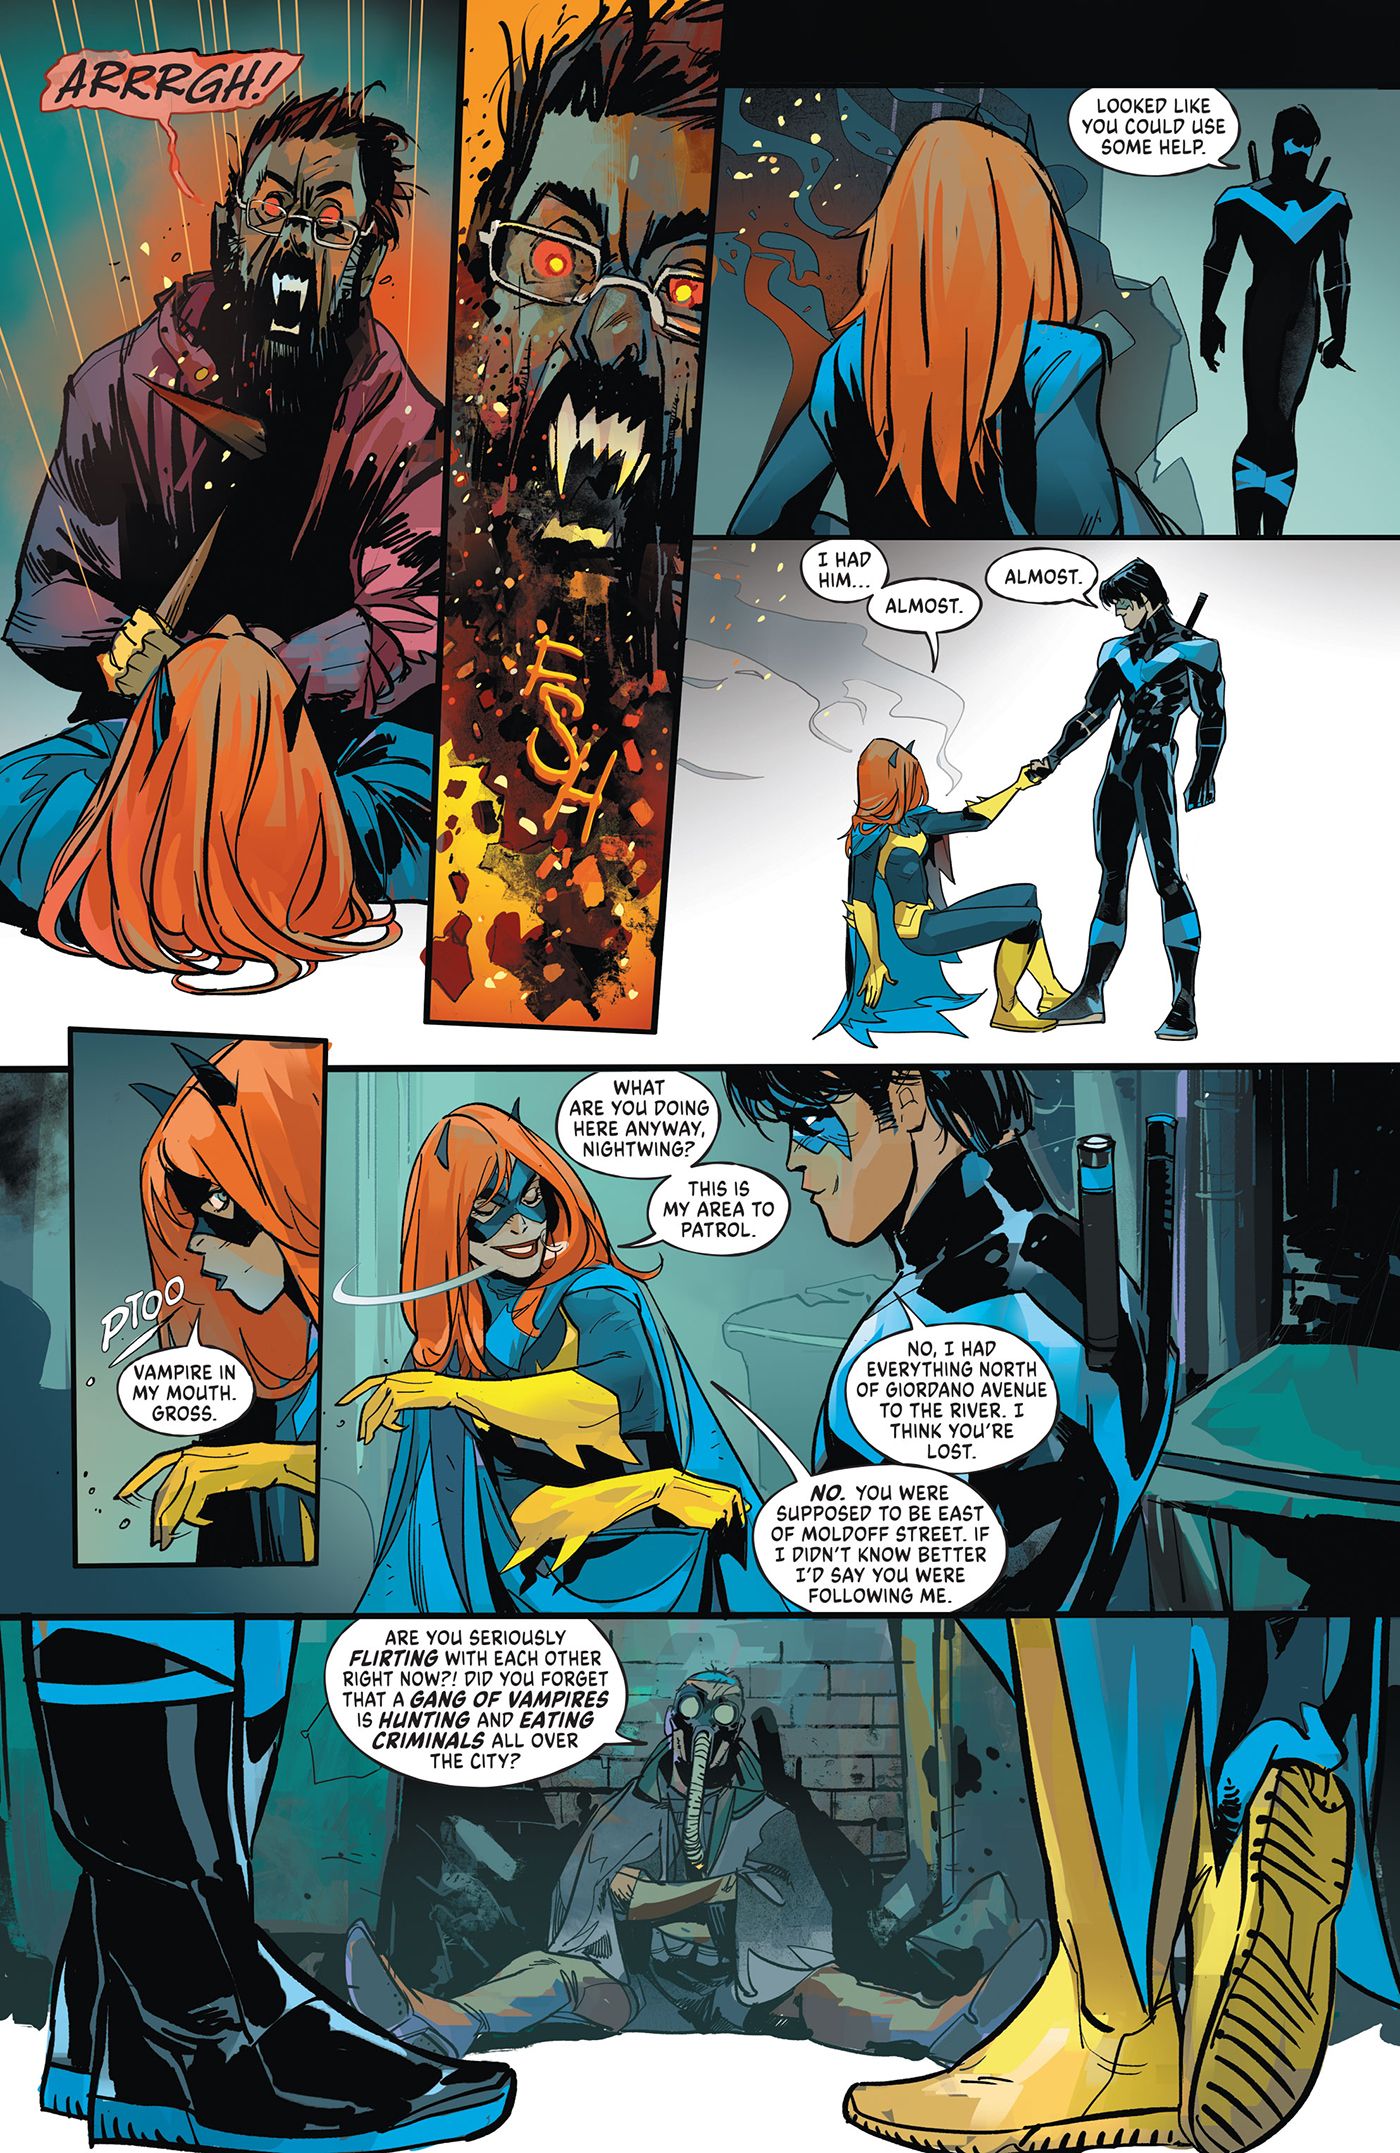 Batgirl is saved by Nightwing, who begin to flirt with each other after killing the vampire.